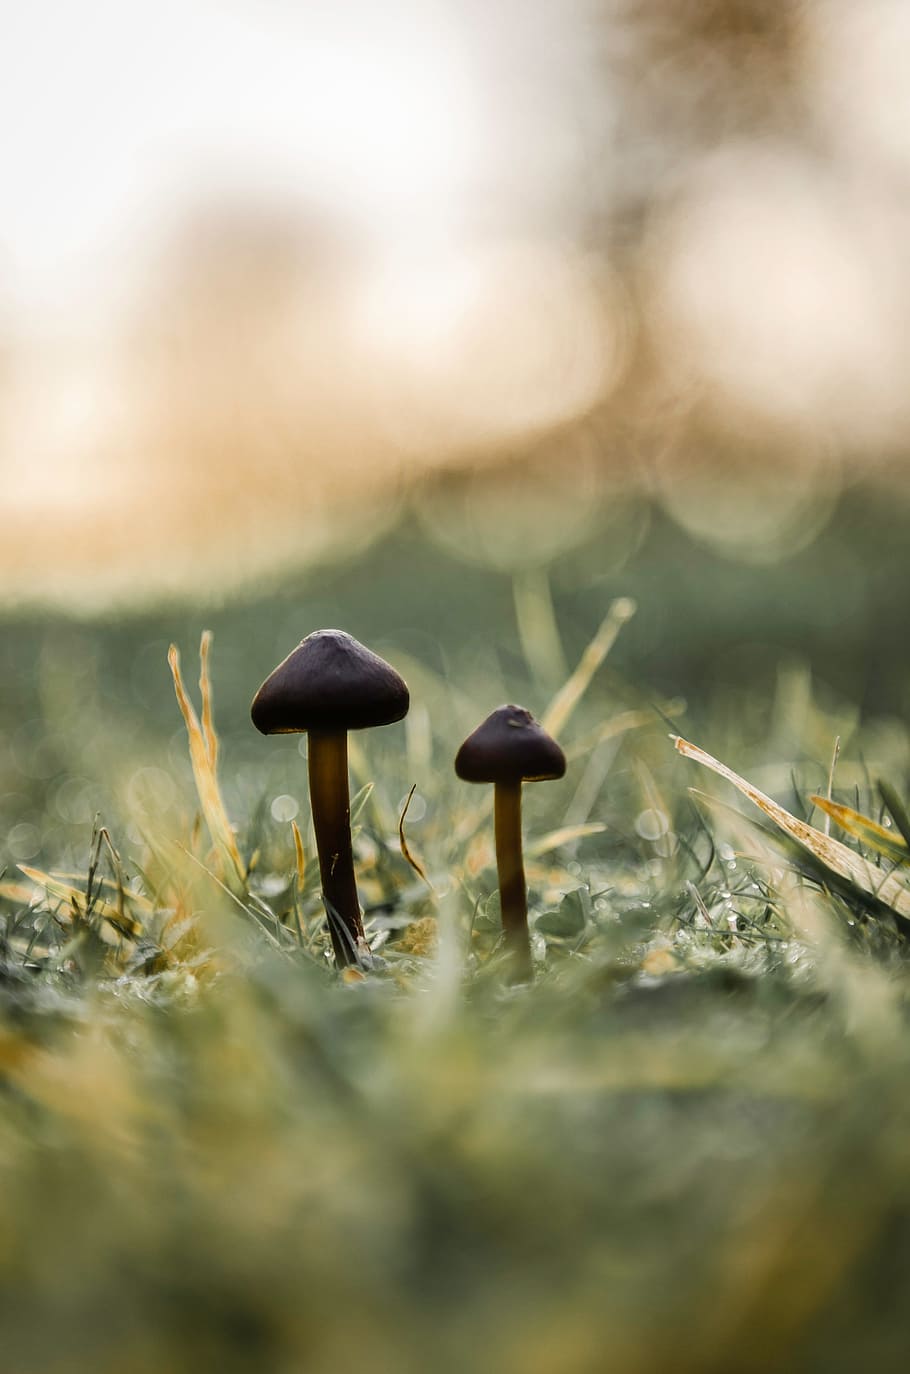 mushroom, little, brother, friend, nature, green, selective focus, plant, growth, field